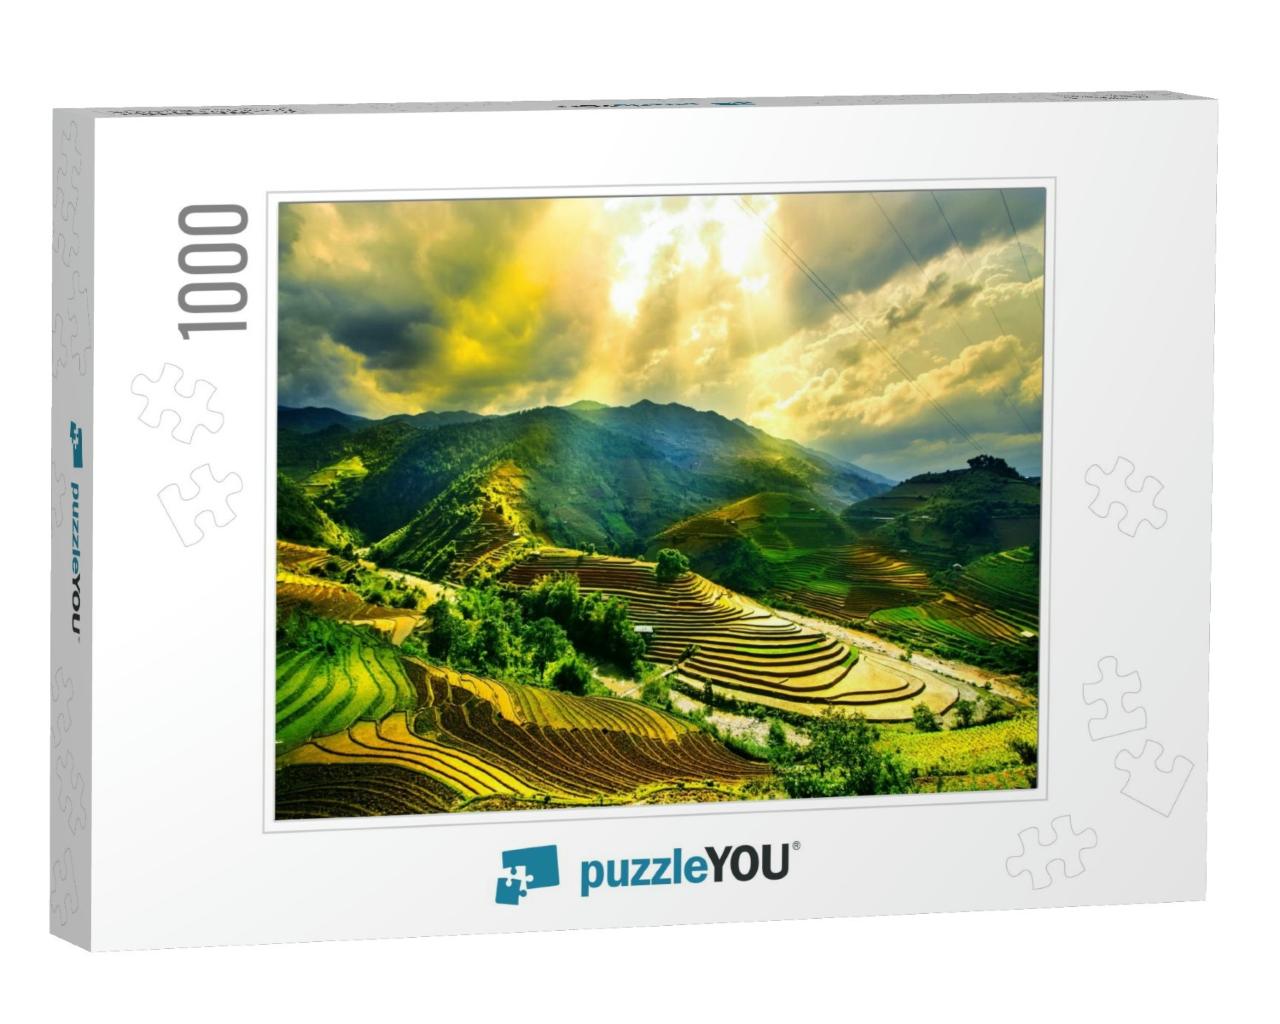 Water on Field Terraced of Mu Cang Chai, Yenbai, Vietnam... Jigsaw Puzzle with 1000 pieces